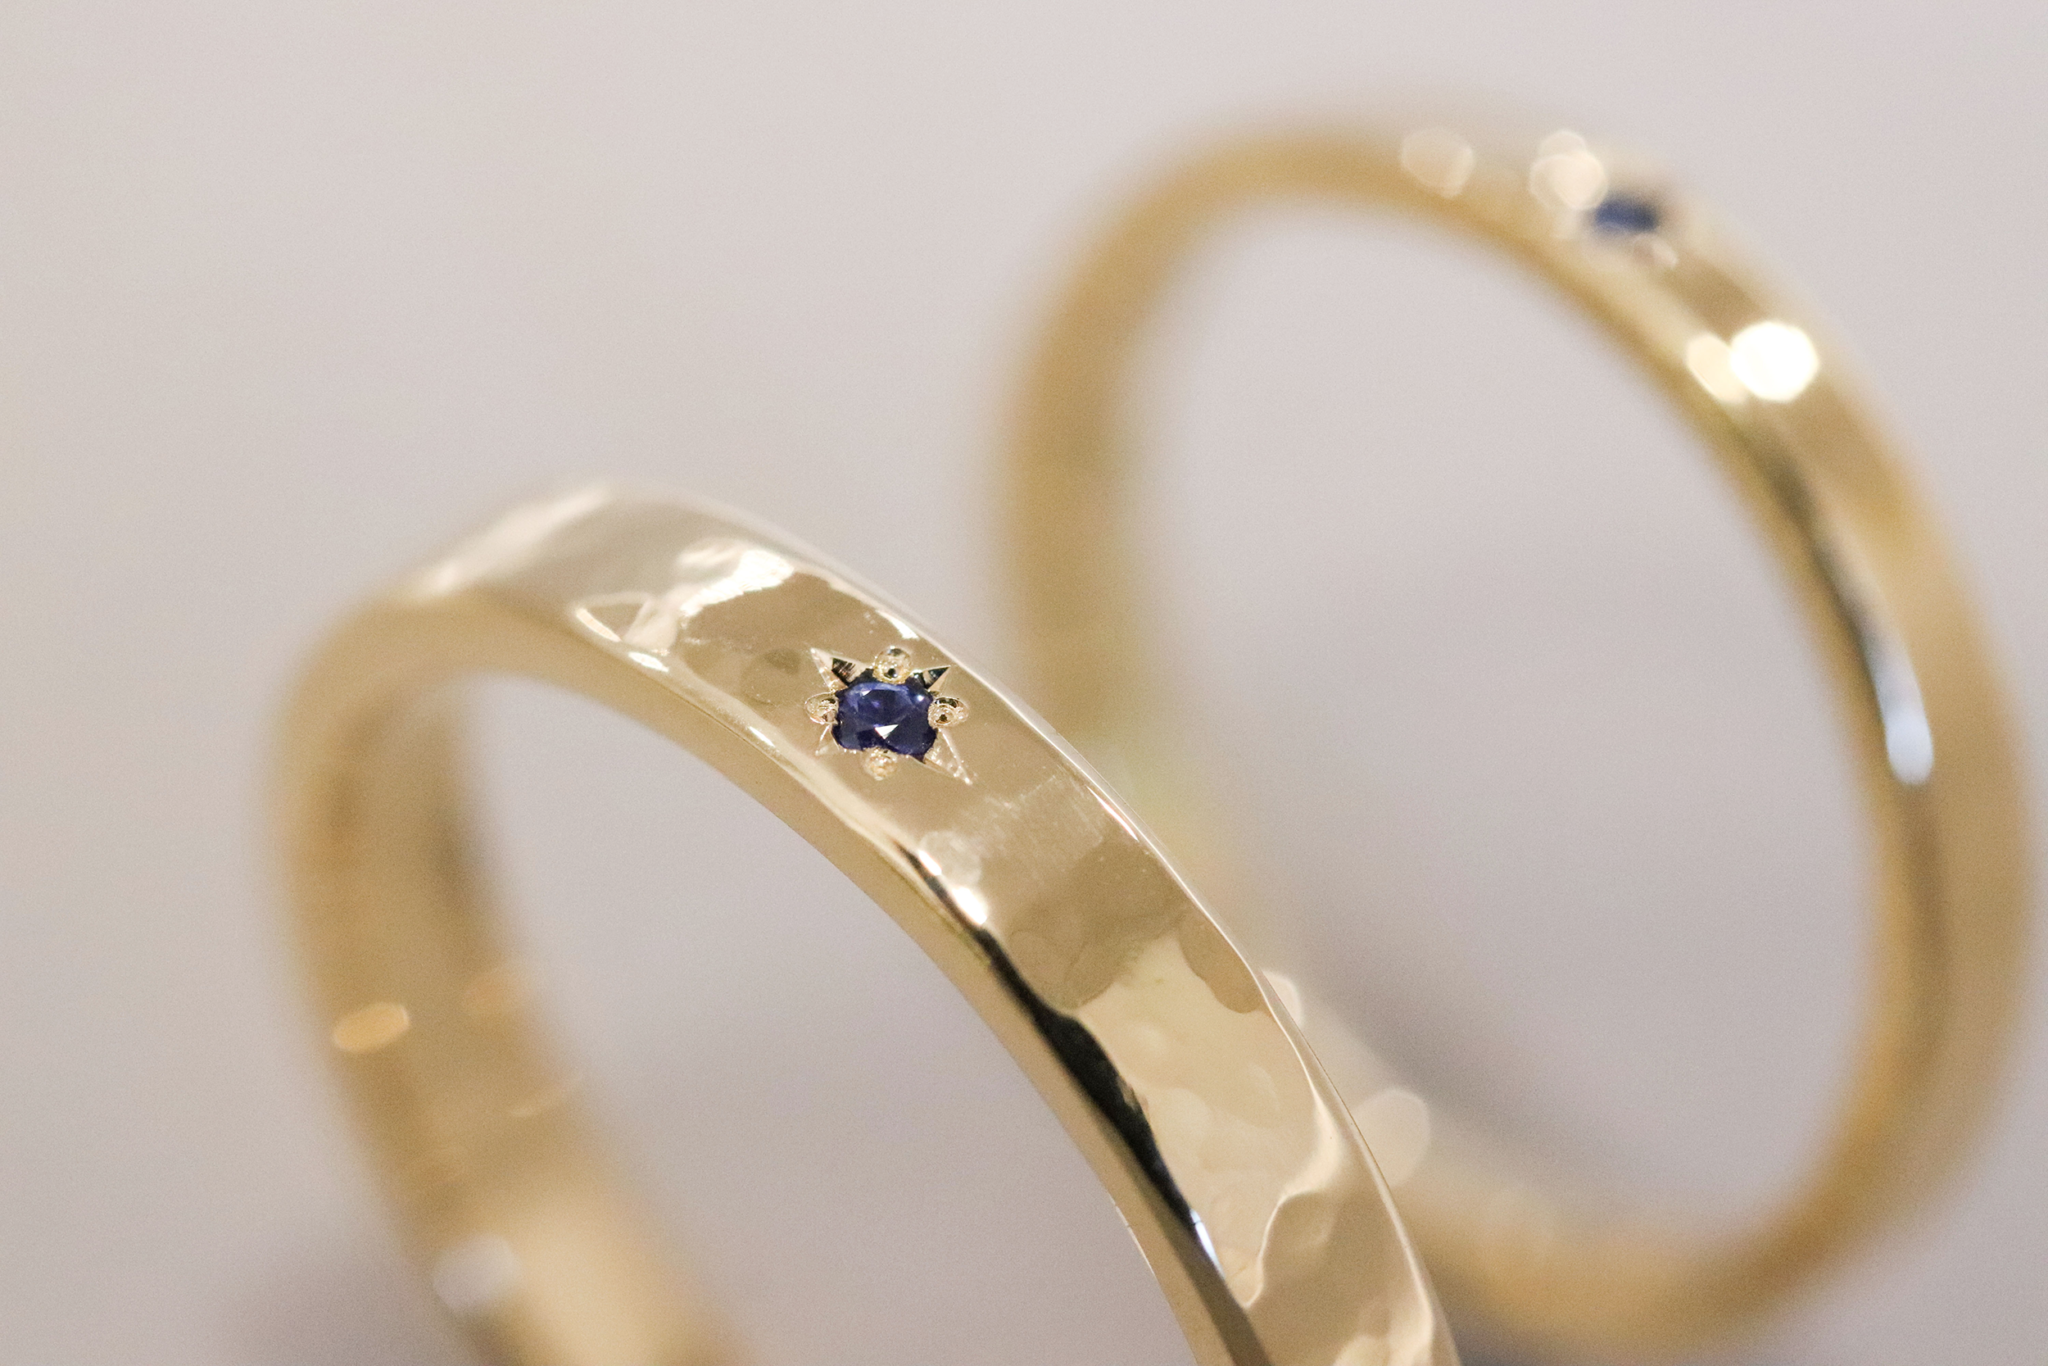 K18YG Wedding Bands + Blue Sapphire Outer Stone